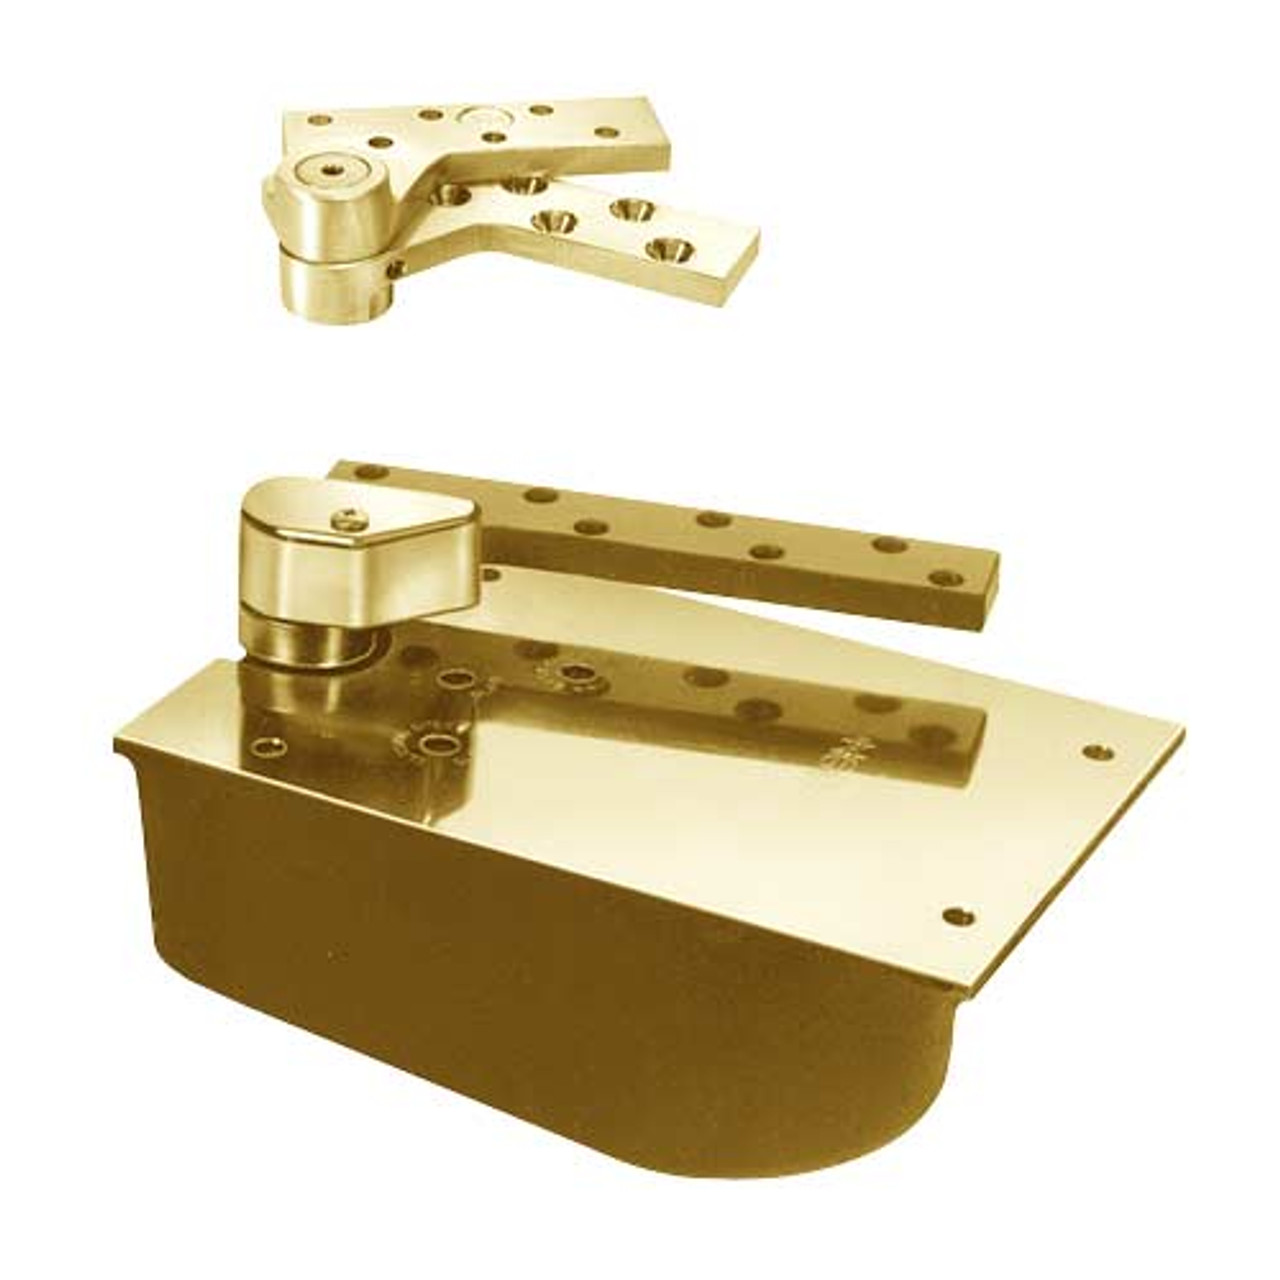 L27-90N-LTP-RH-2-1/4-605 Rixson 27 Series Extra Heavy Duty Lead Lined Offset Floor Closer in Bright Brass Finish